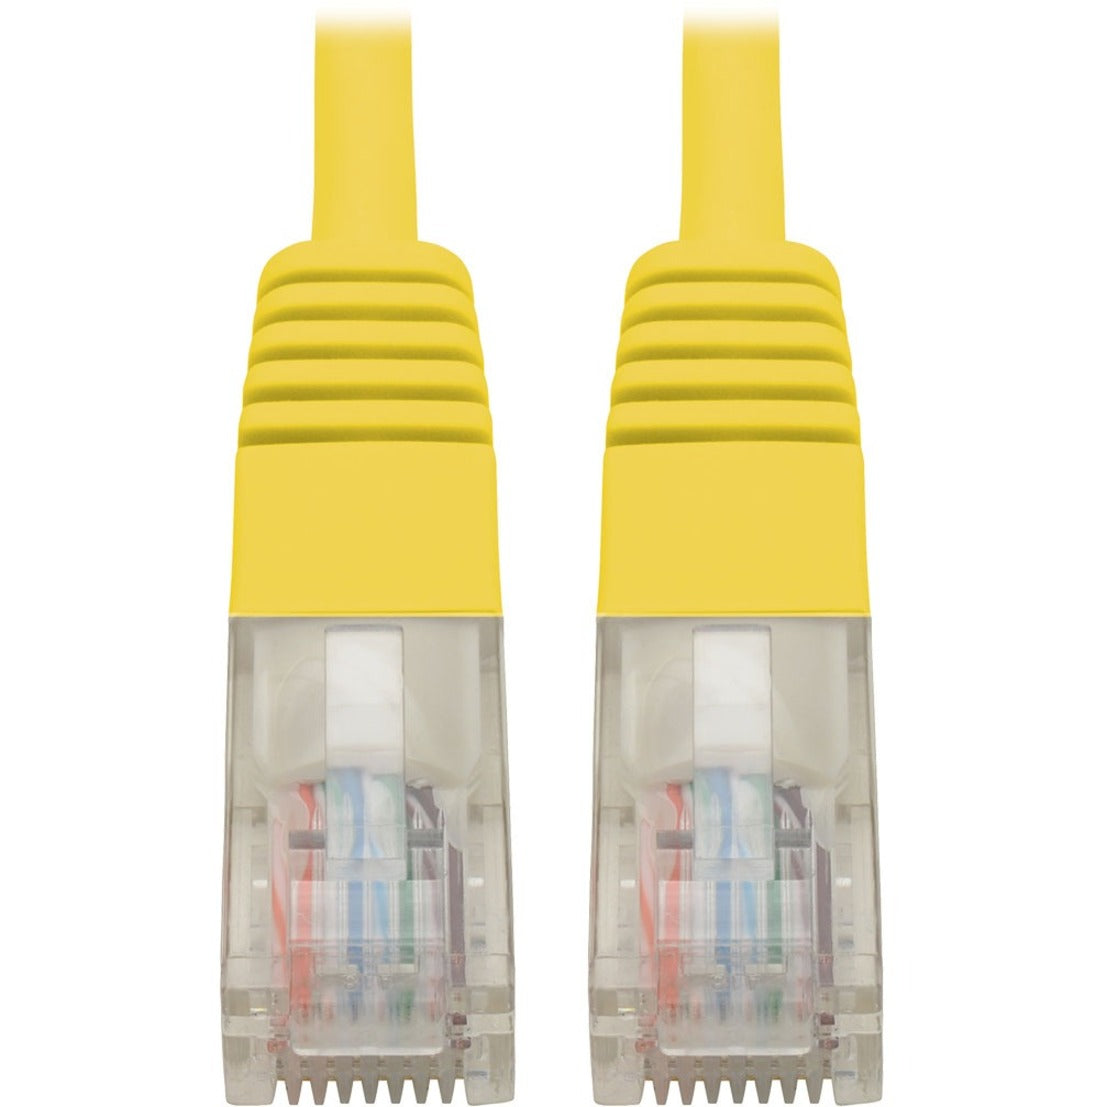 Tripp Lite N002-002-YW Cat5e 350 MHz Molded UTP Patch Cable (RJ45 M/M), Yellow, 2 ft. - High-Speed Data Transfer, Lifetime Warranty